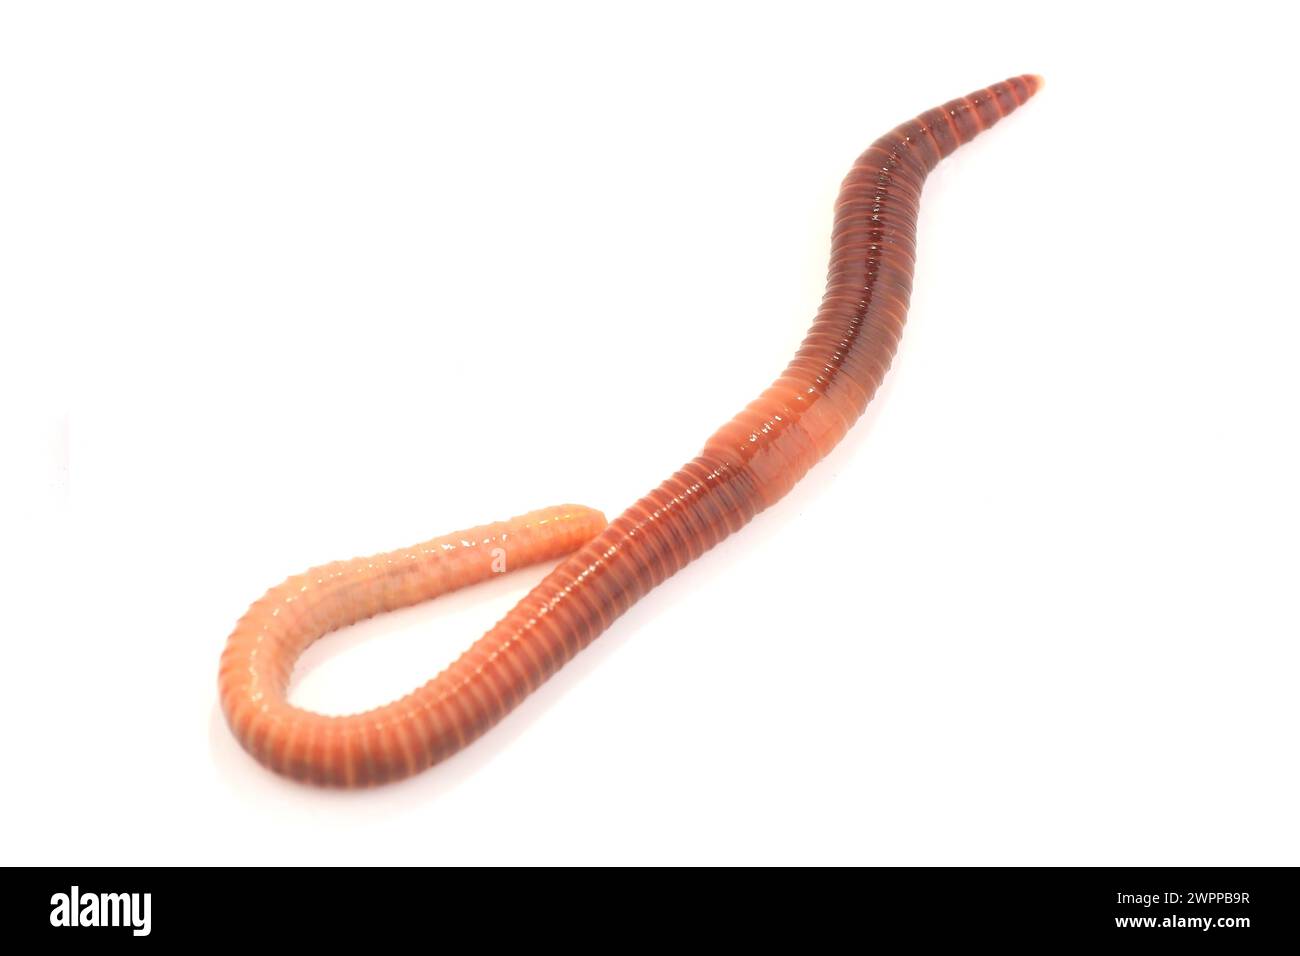 https://c8.alamy.com/comp/2WPPB9R/earth-worm-isolated-on-white-background-2WPPB9R.jpg